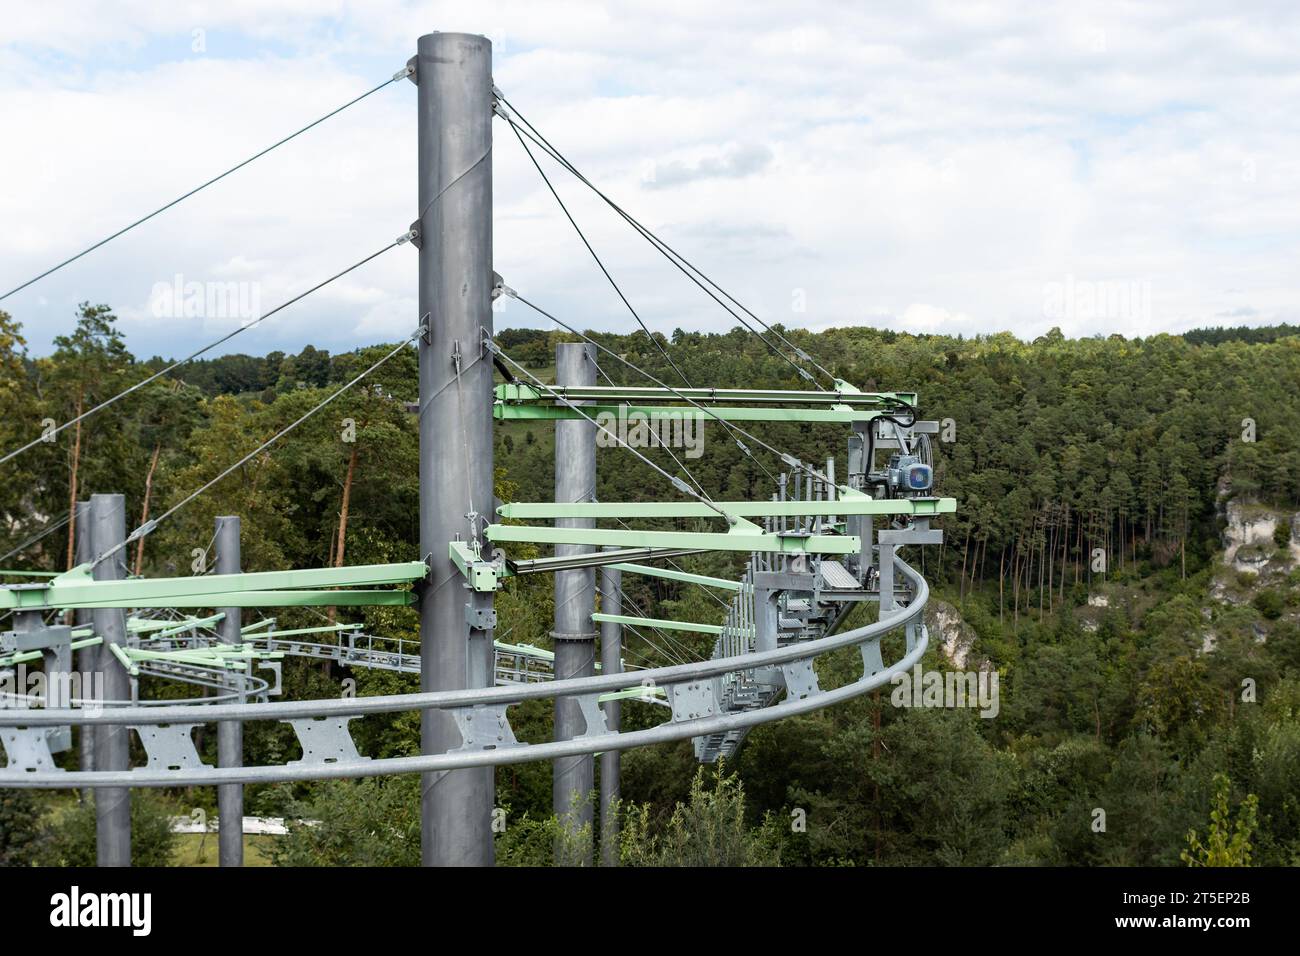 Rail track of a fun park ride in the nature. The steel building is solid and capable of holding a gondola. The attraction is popular with tourists. Stock Photo